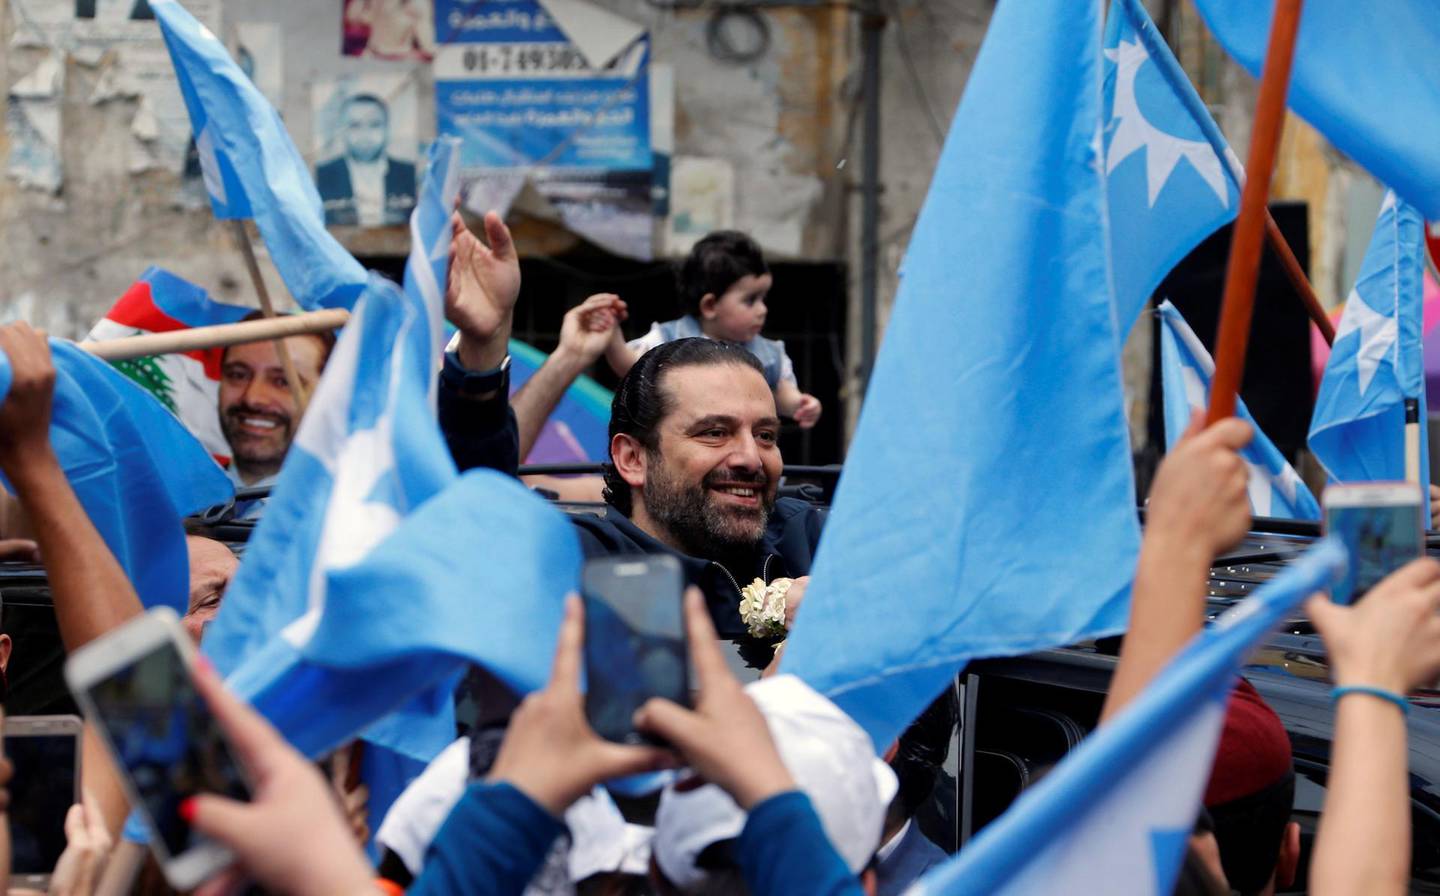 Lebanese prime minister and candidate for parliamentary election Saad al-Hariri greets his supporters in Beirut, Lebanon May 4, 2018. REUTERS/Mohamed Azakir